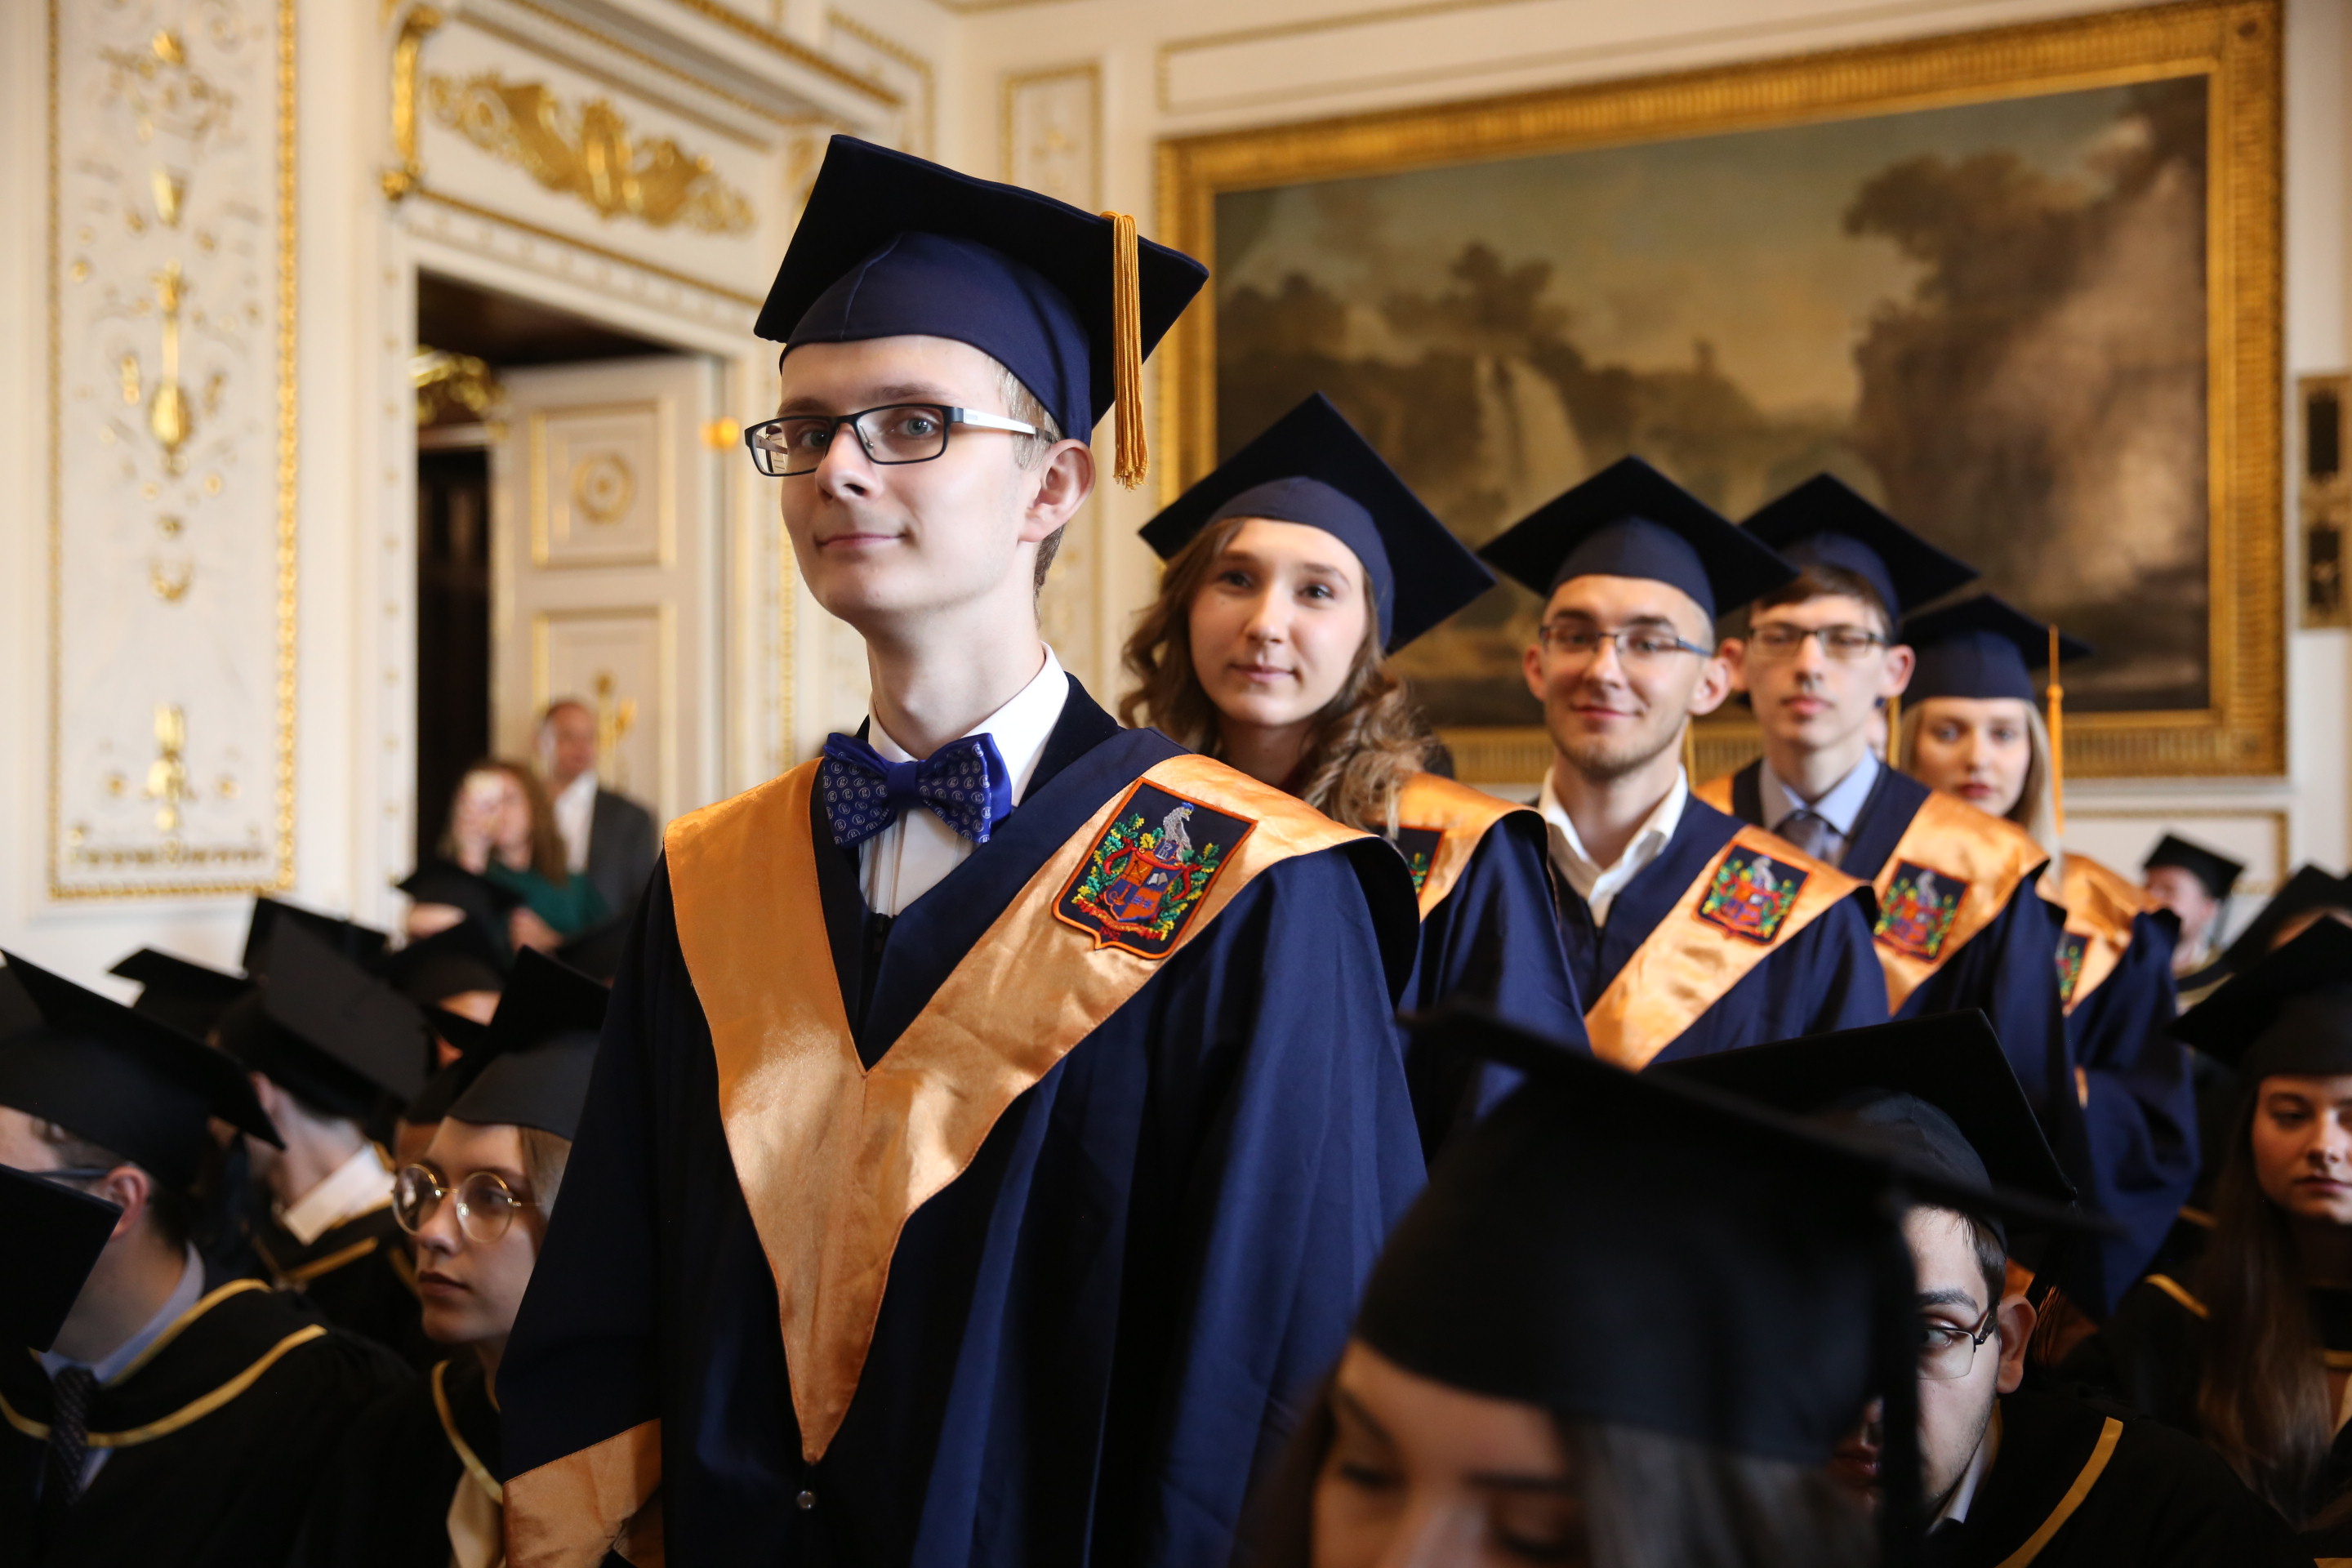 Masters at the Graduation Ceremony in British Embassy 